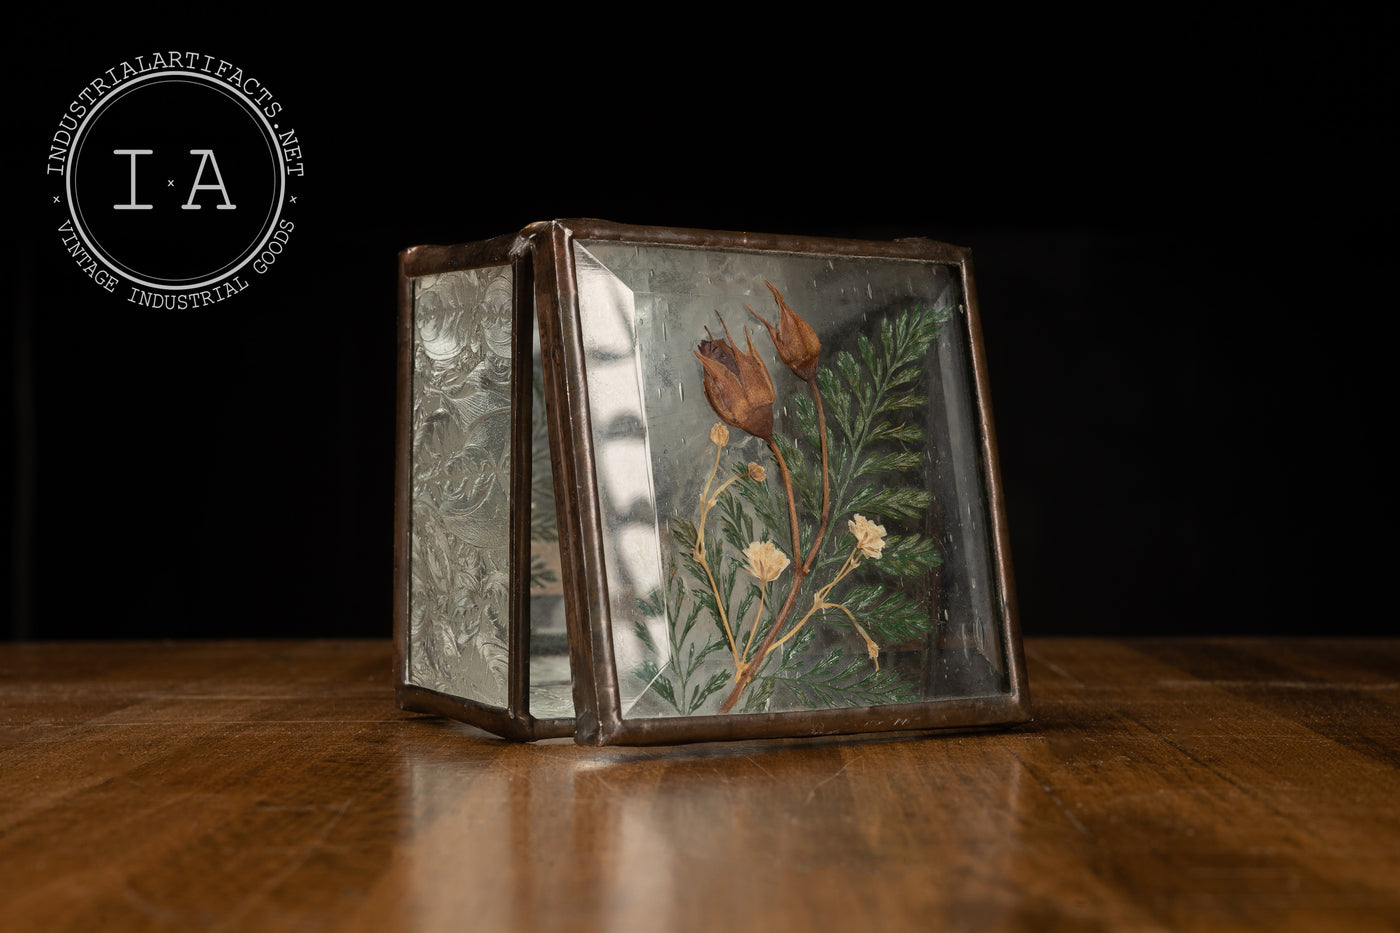 Etched Glass Jewelry Box with Pressed Flowers